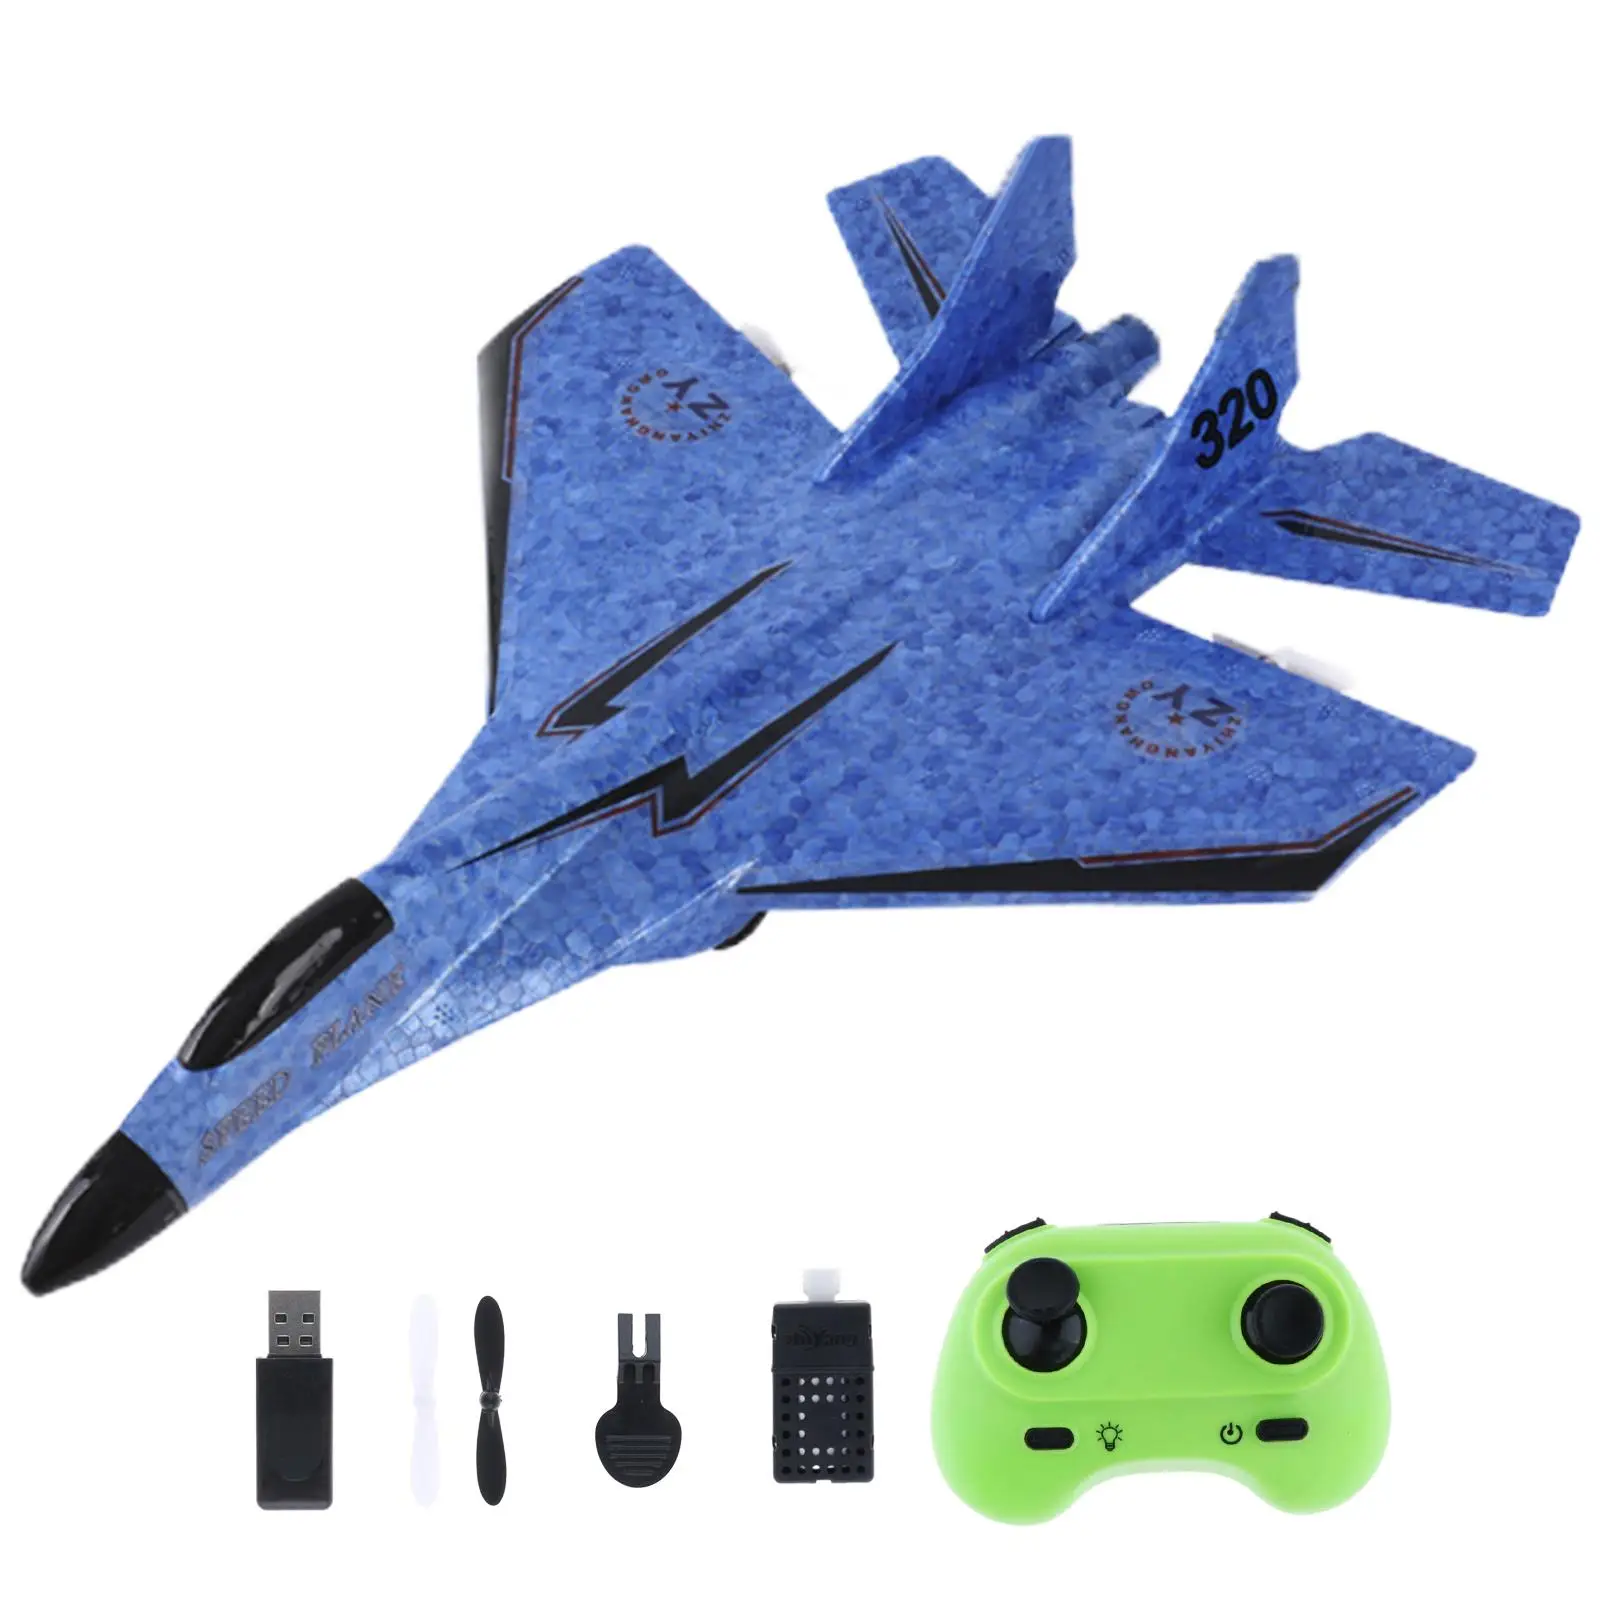 2 Plane Portable Ready to Easy to Control with Light Gift Foam RC Airplane RC Glider Aircraft for Kids Boys Girls